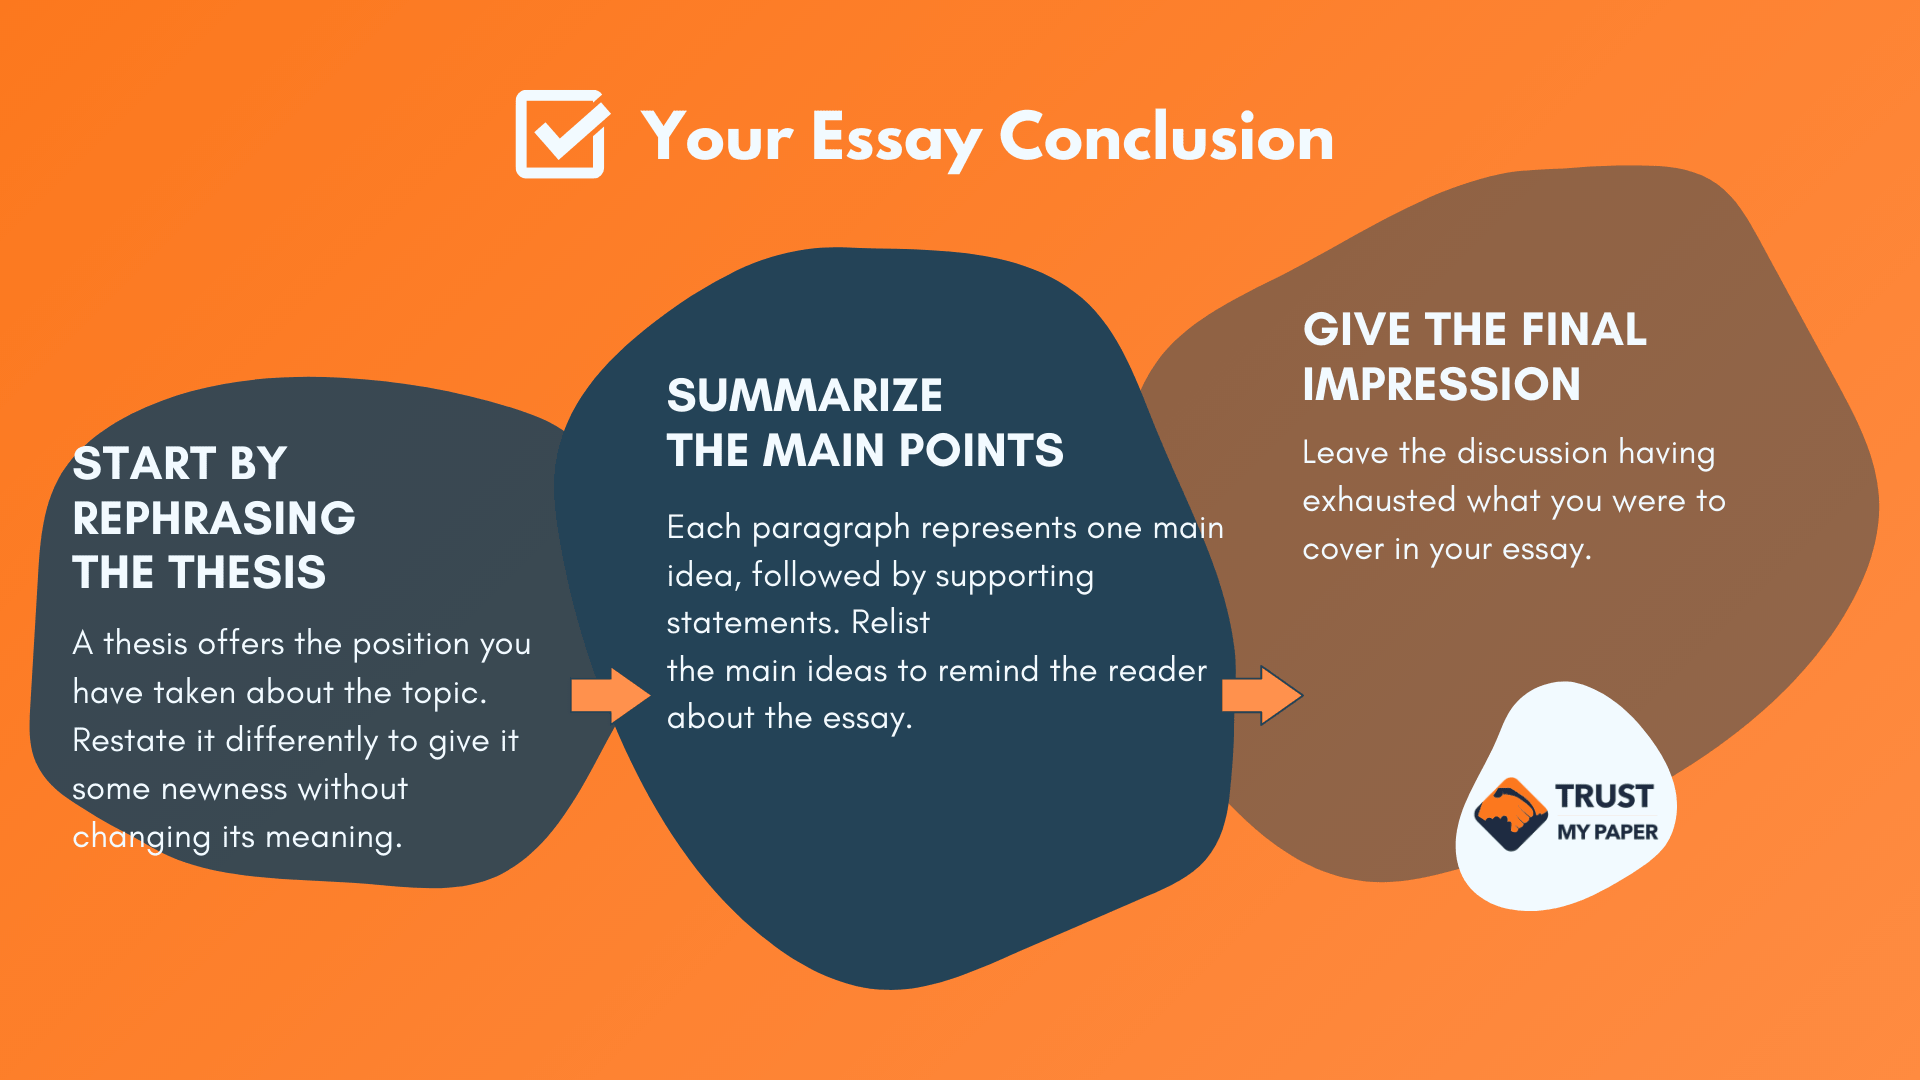 Writing an essay conclusion infographic